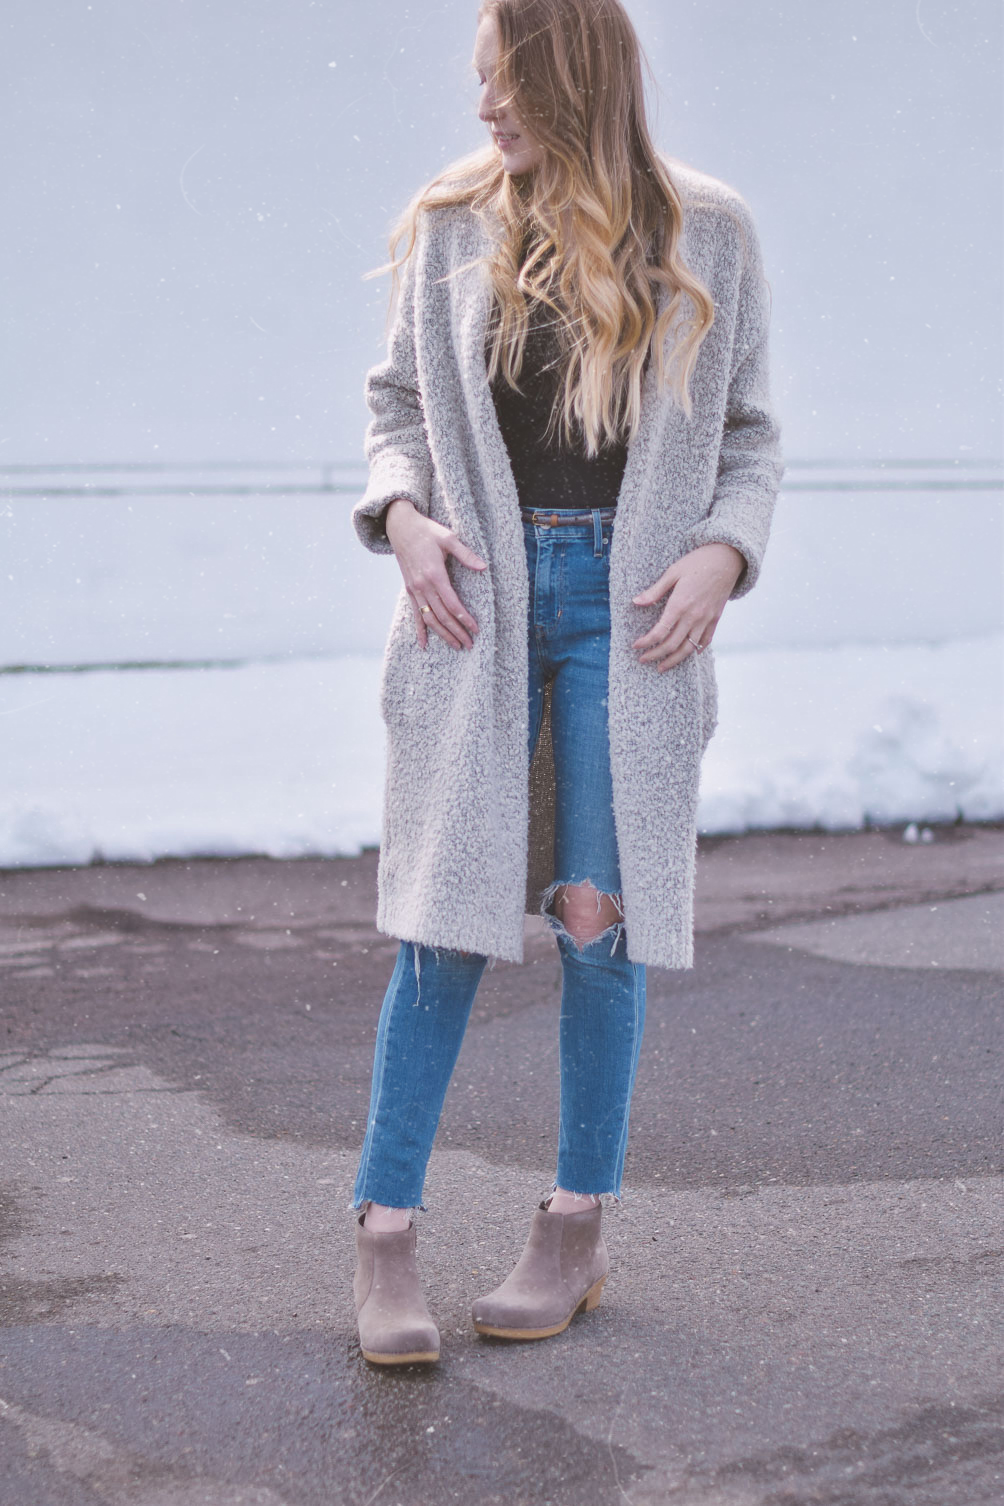 sharing a fashion tutorial just in time for spring style with these diy ram hem jeans